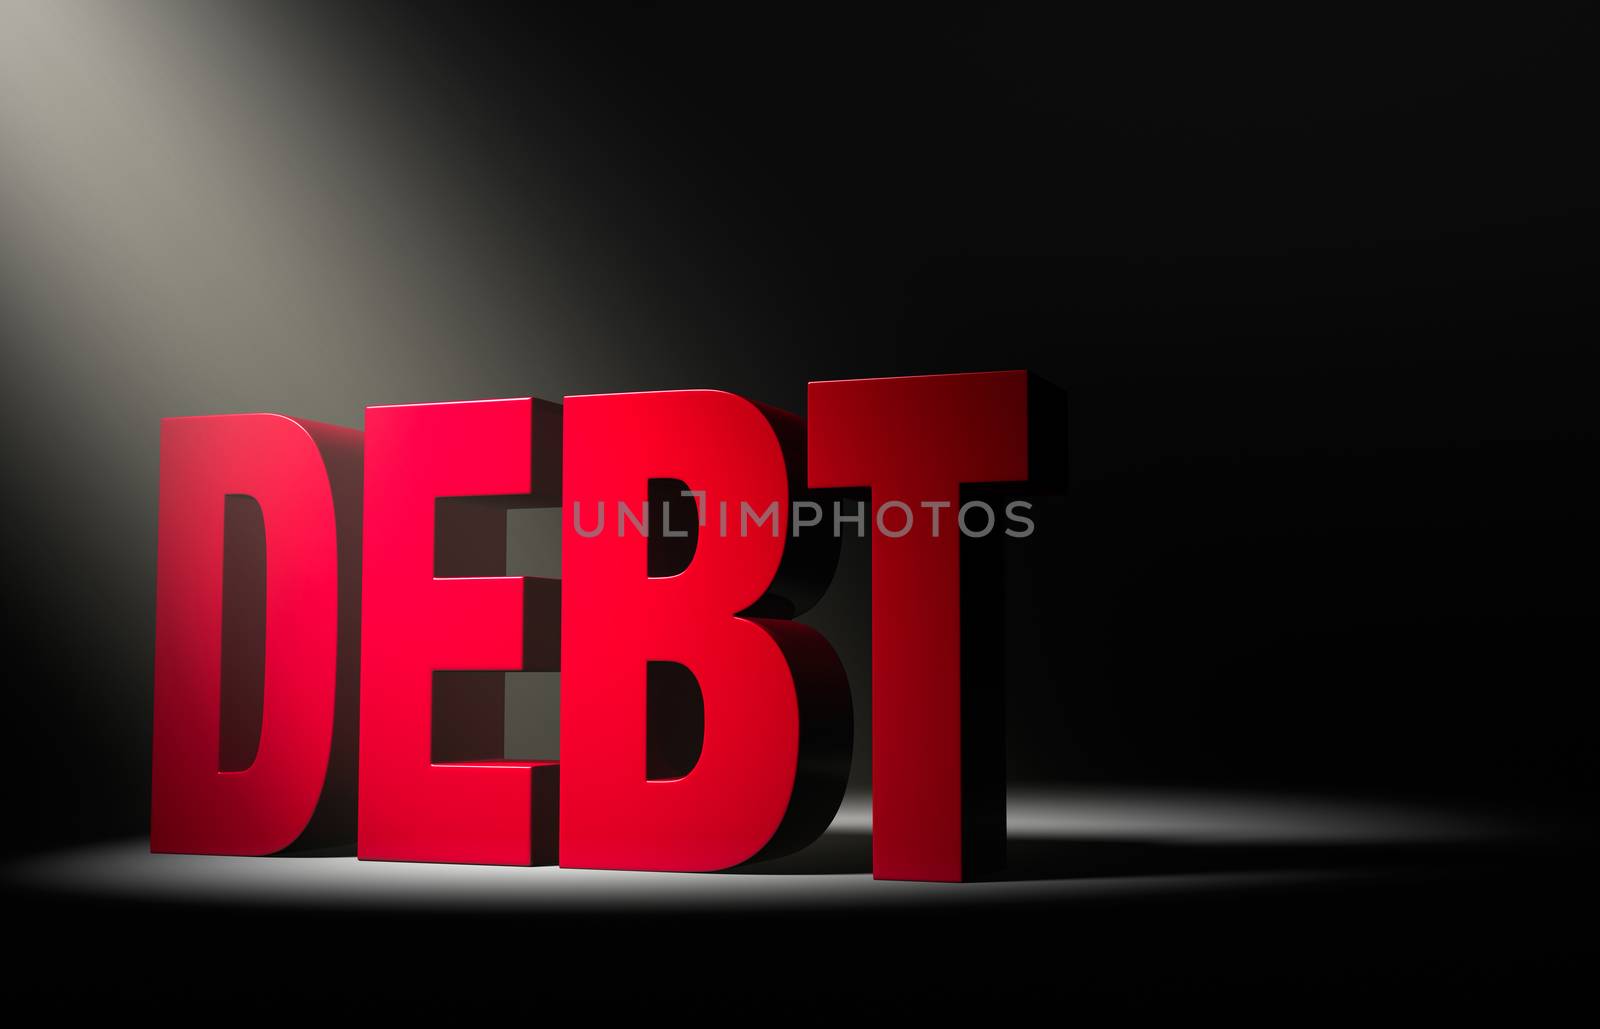 Angled spotlight revealing a large, looming red "DEBT" on a dark background.